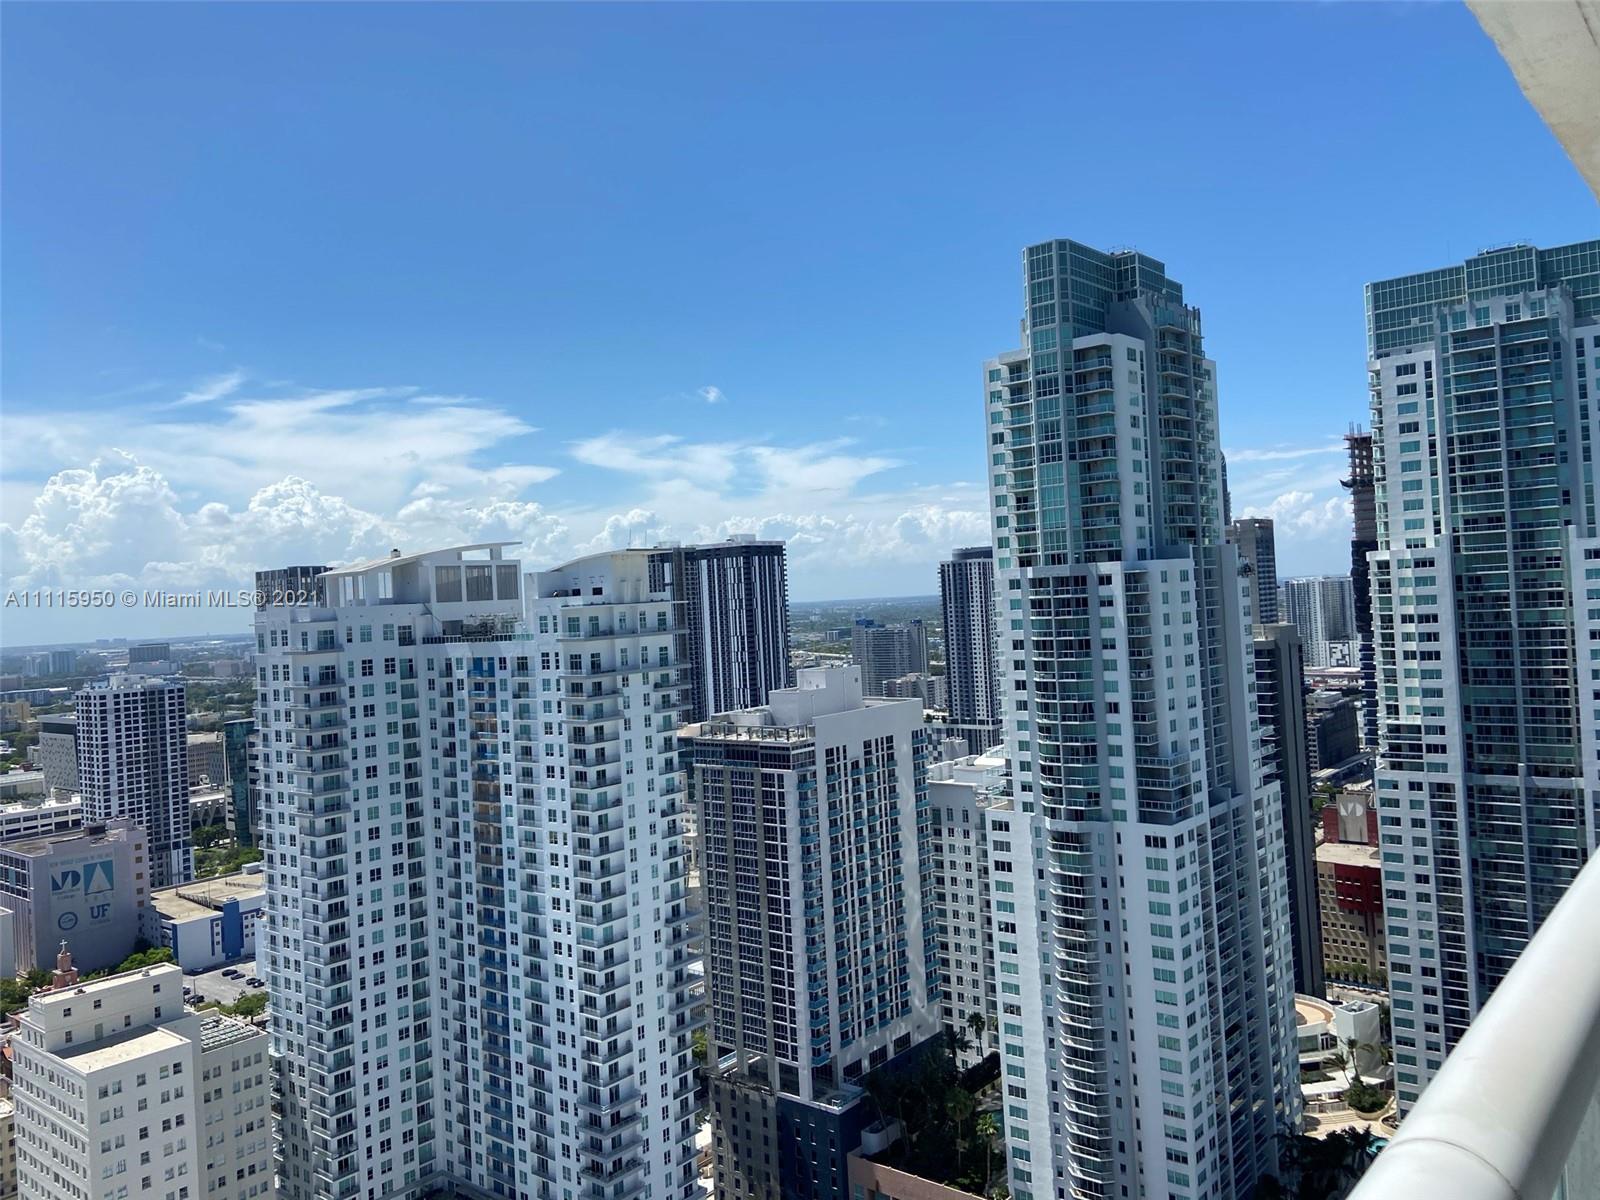 AMAZING STUDIO, ENJOY THIS RESIDENCE IN THE HEART OF BUSINESS DISTRICT, WALKING DISTANCE TO BAYSIDE, AA ARENA, PERFORMING ARTS CENTER, PAMM MUSEUM, SHOPPING AND DINING. FULL AMENITIES, LUXURY POOL DECK OVERLOOKING THE CITY. ACTUALLY RENTED.